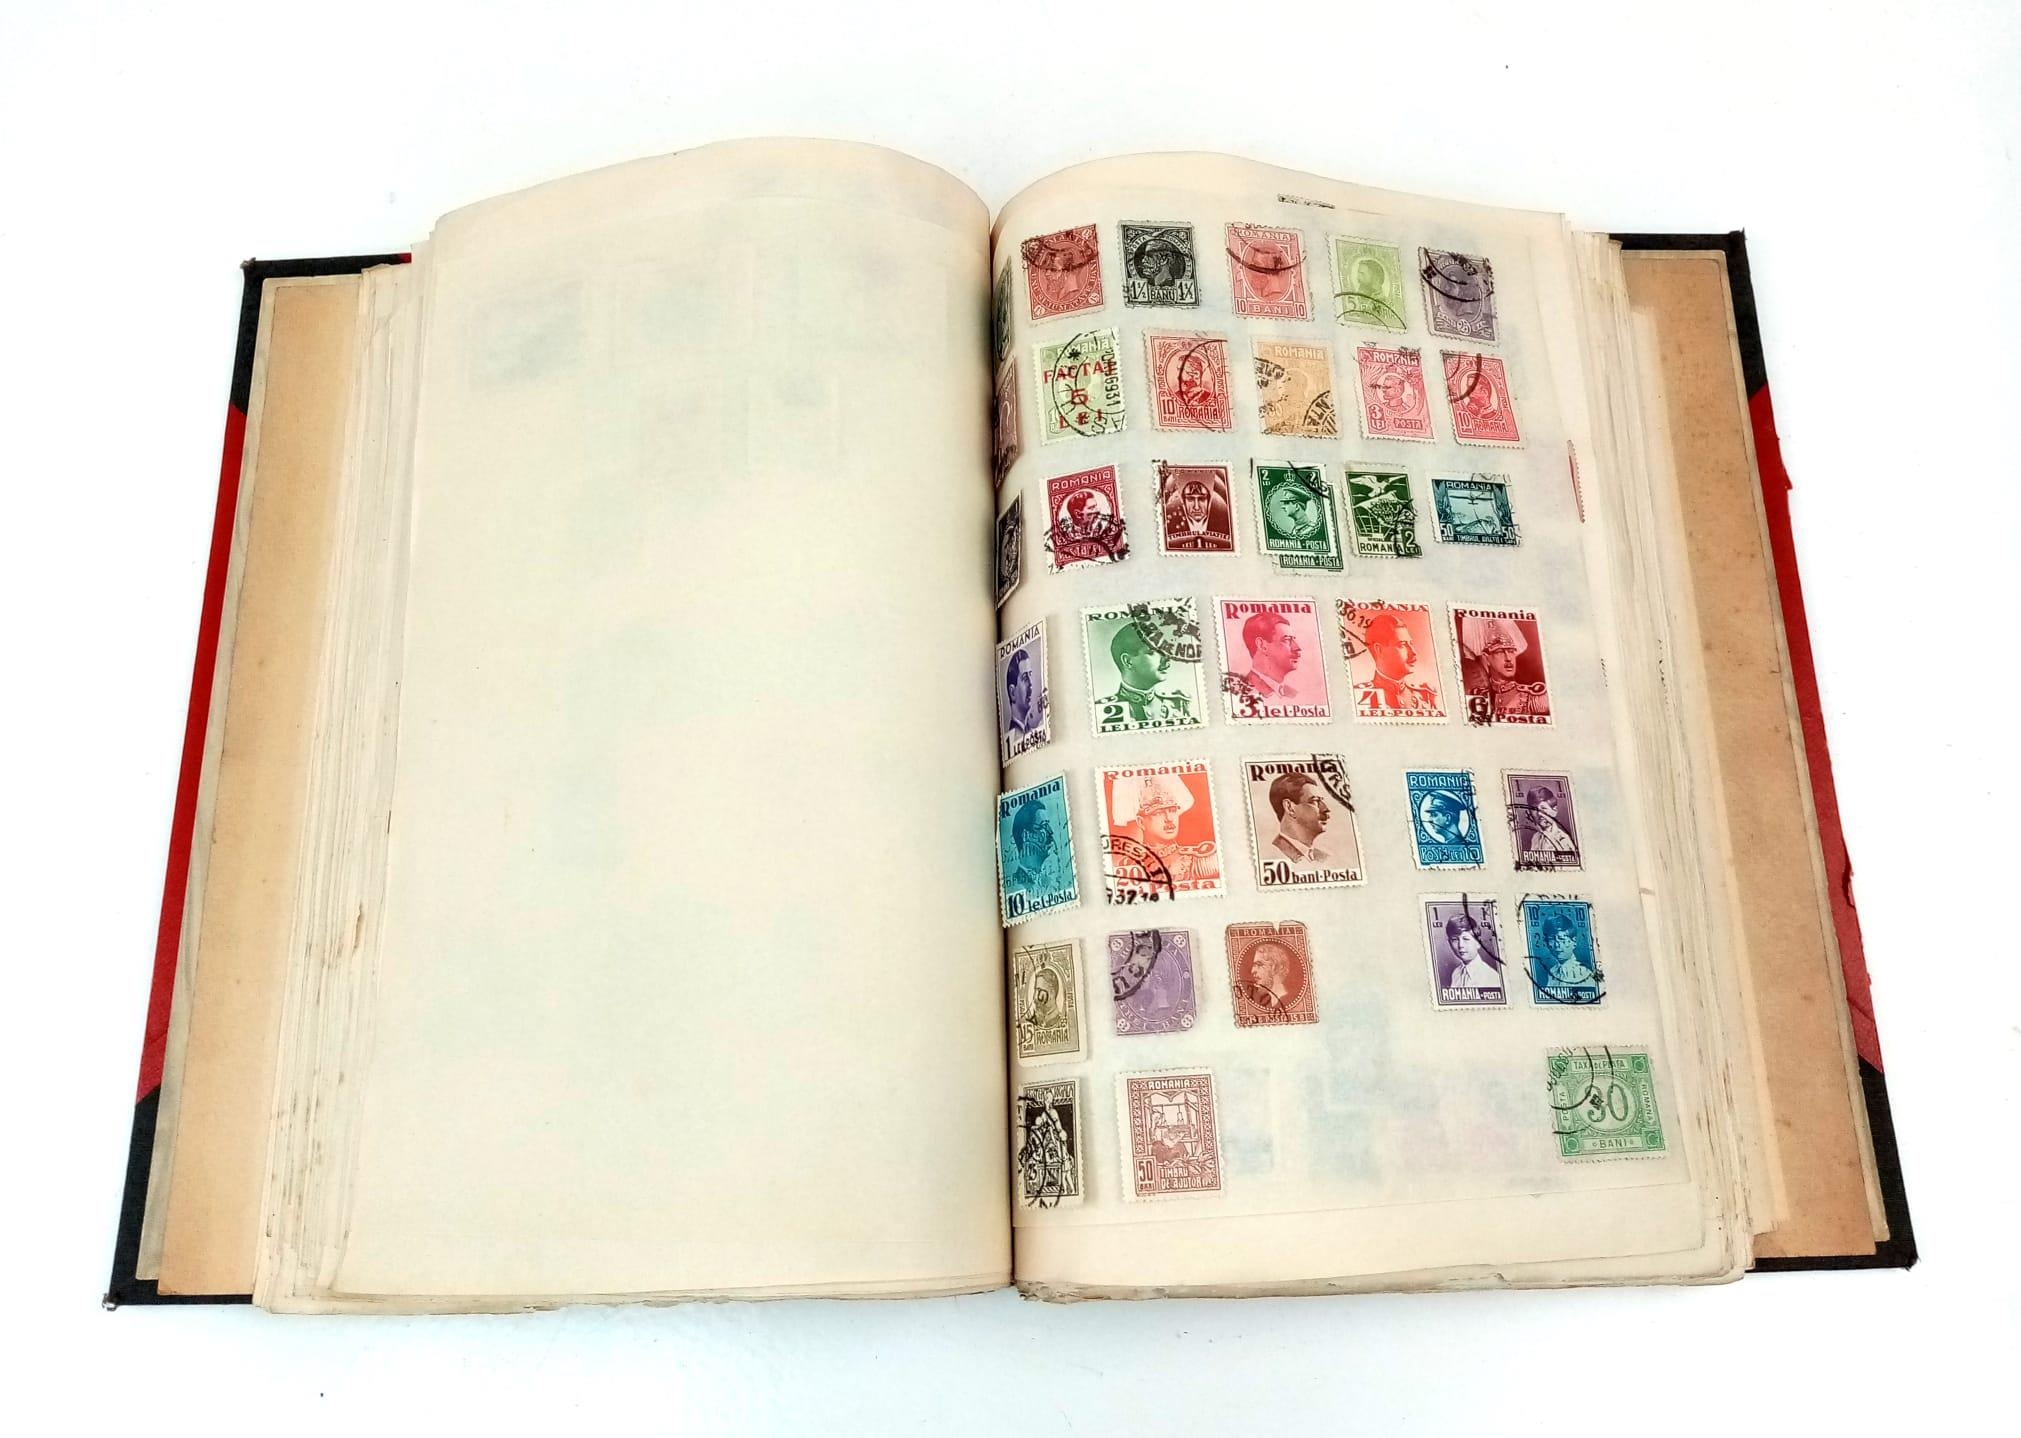 Two Vintage/Antique Foreign Books of Stamps. Some unused, mint - some extremely rare. Definitely - Image 2 of 6